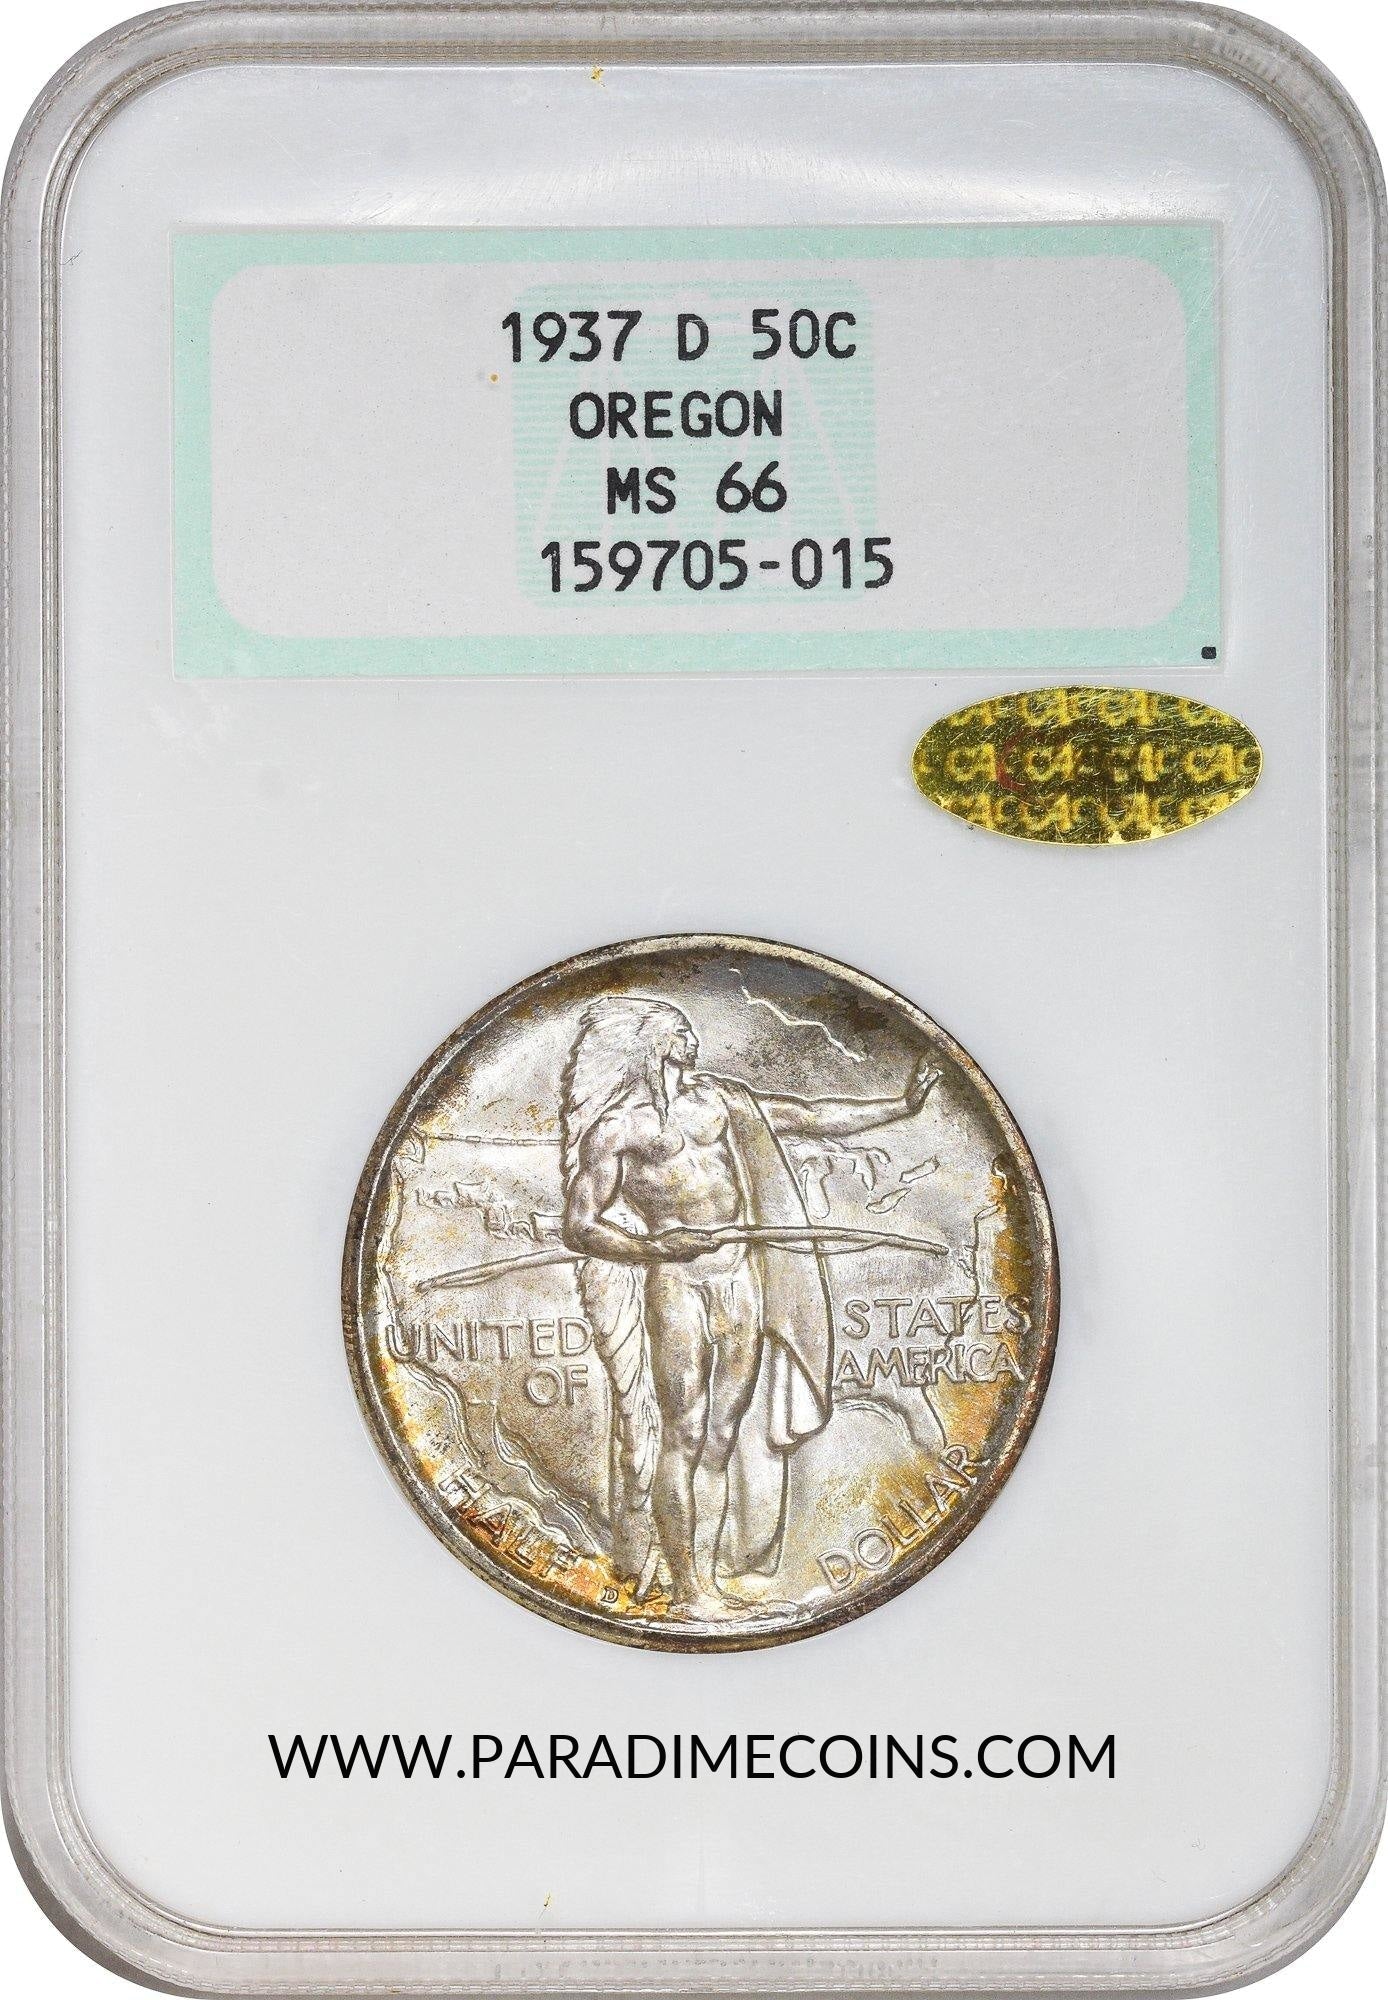 1937-D 50C Oregon MS66 GOLD CAC NGC OH - Paradime Coins | PCGS NGC CACG CAC Rare US Numismatic Coins For Sale